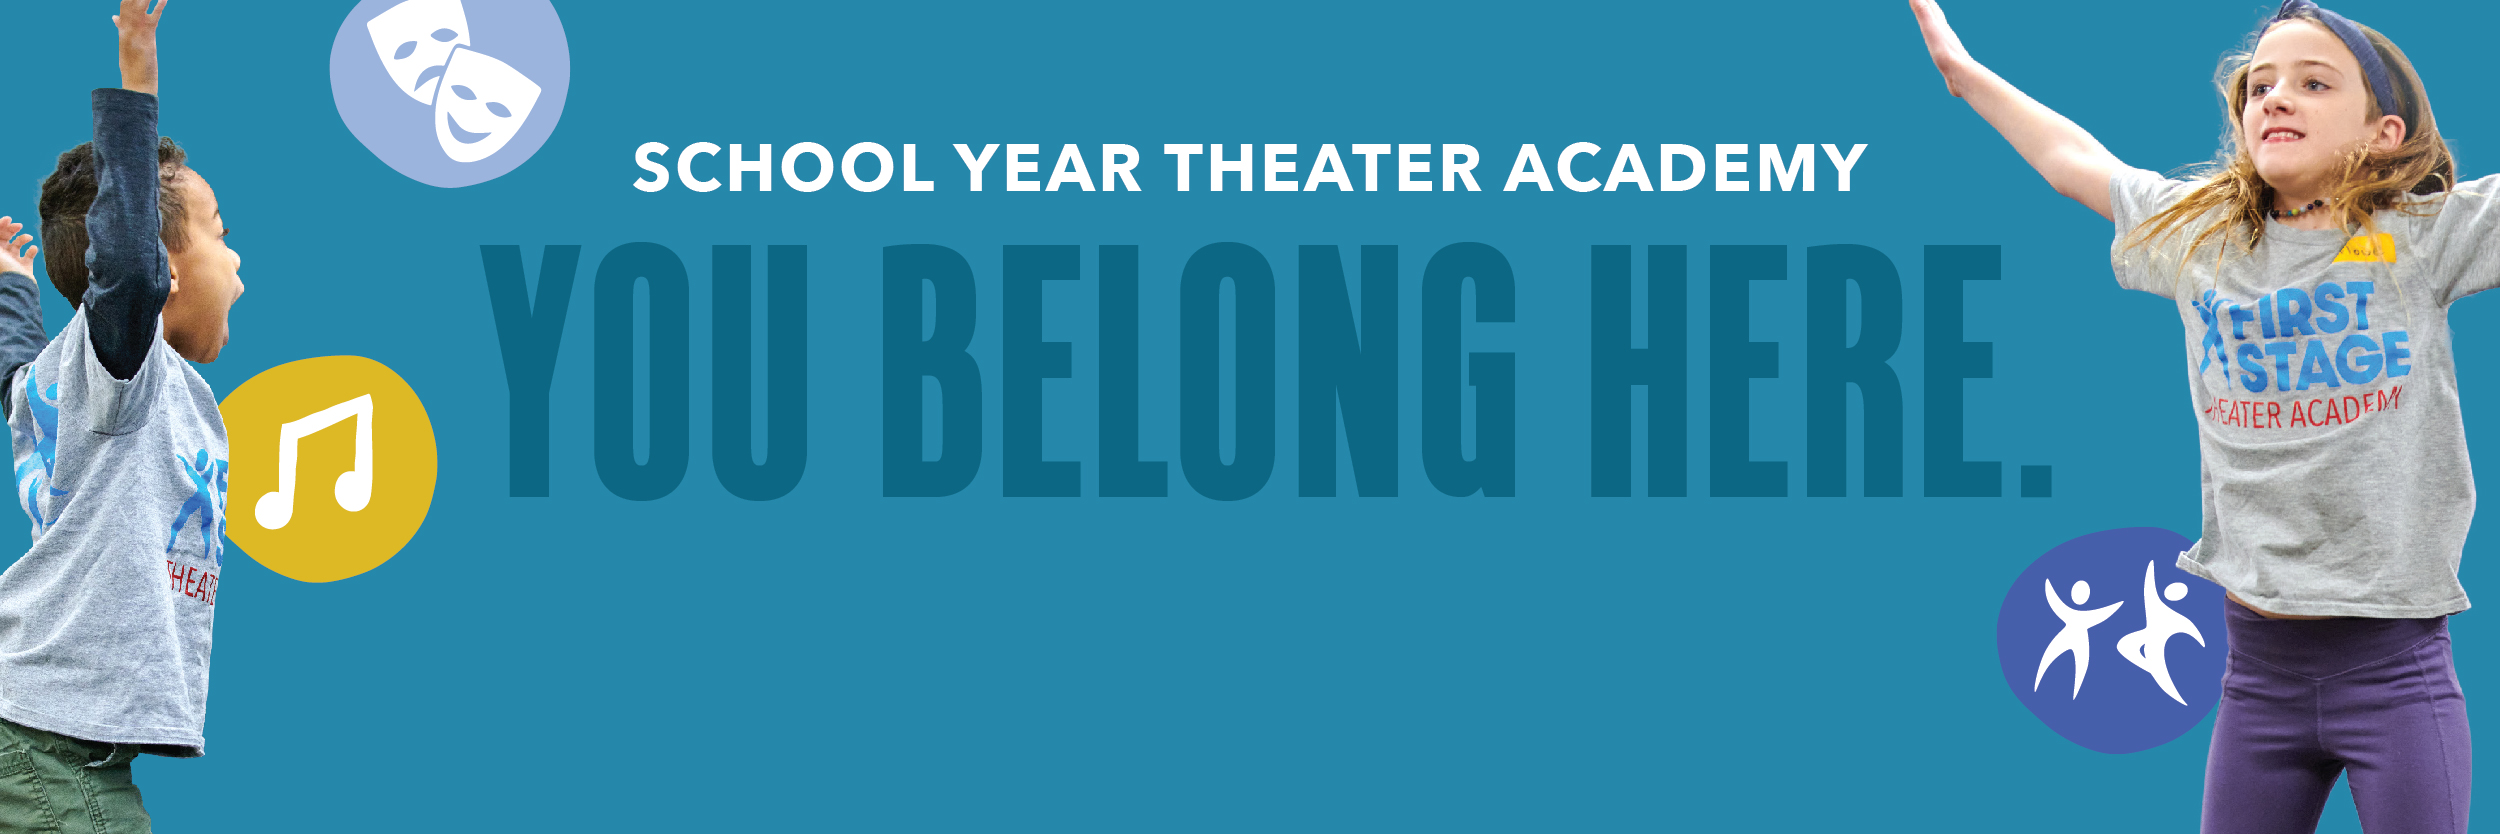 First Stage School Year Theater Academy